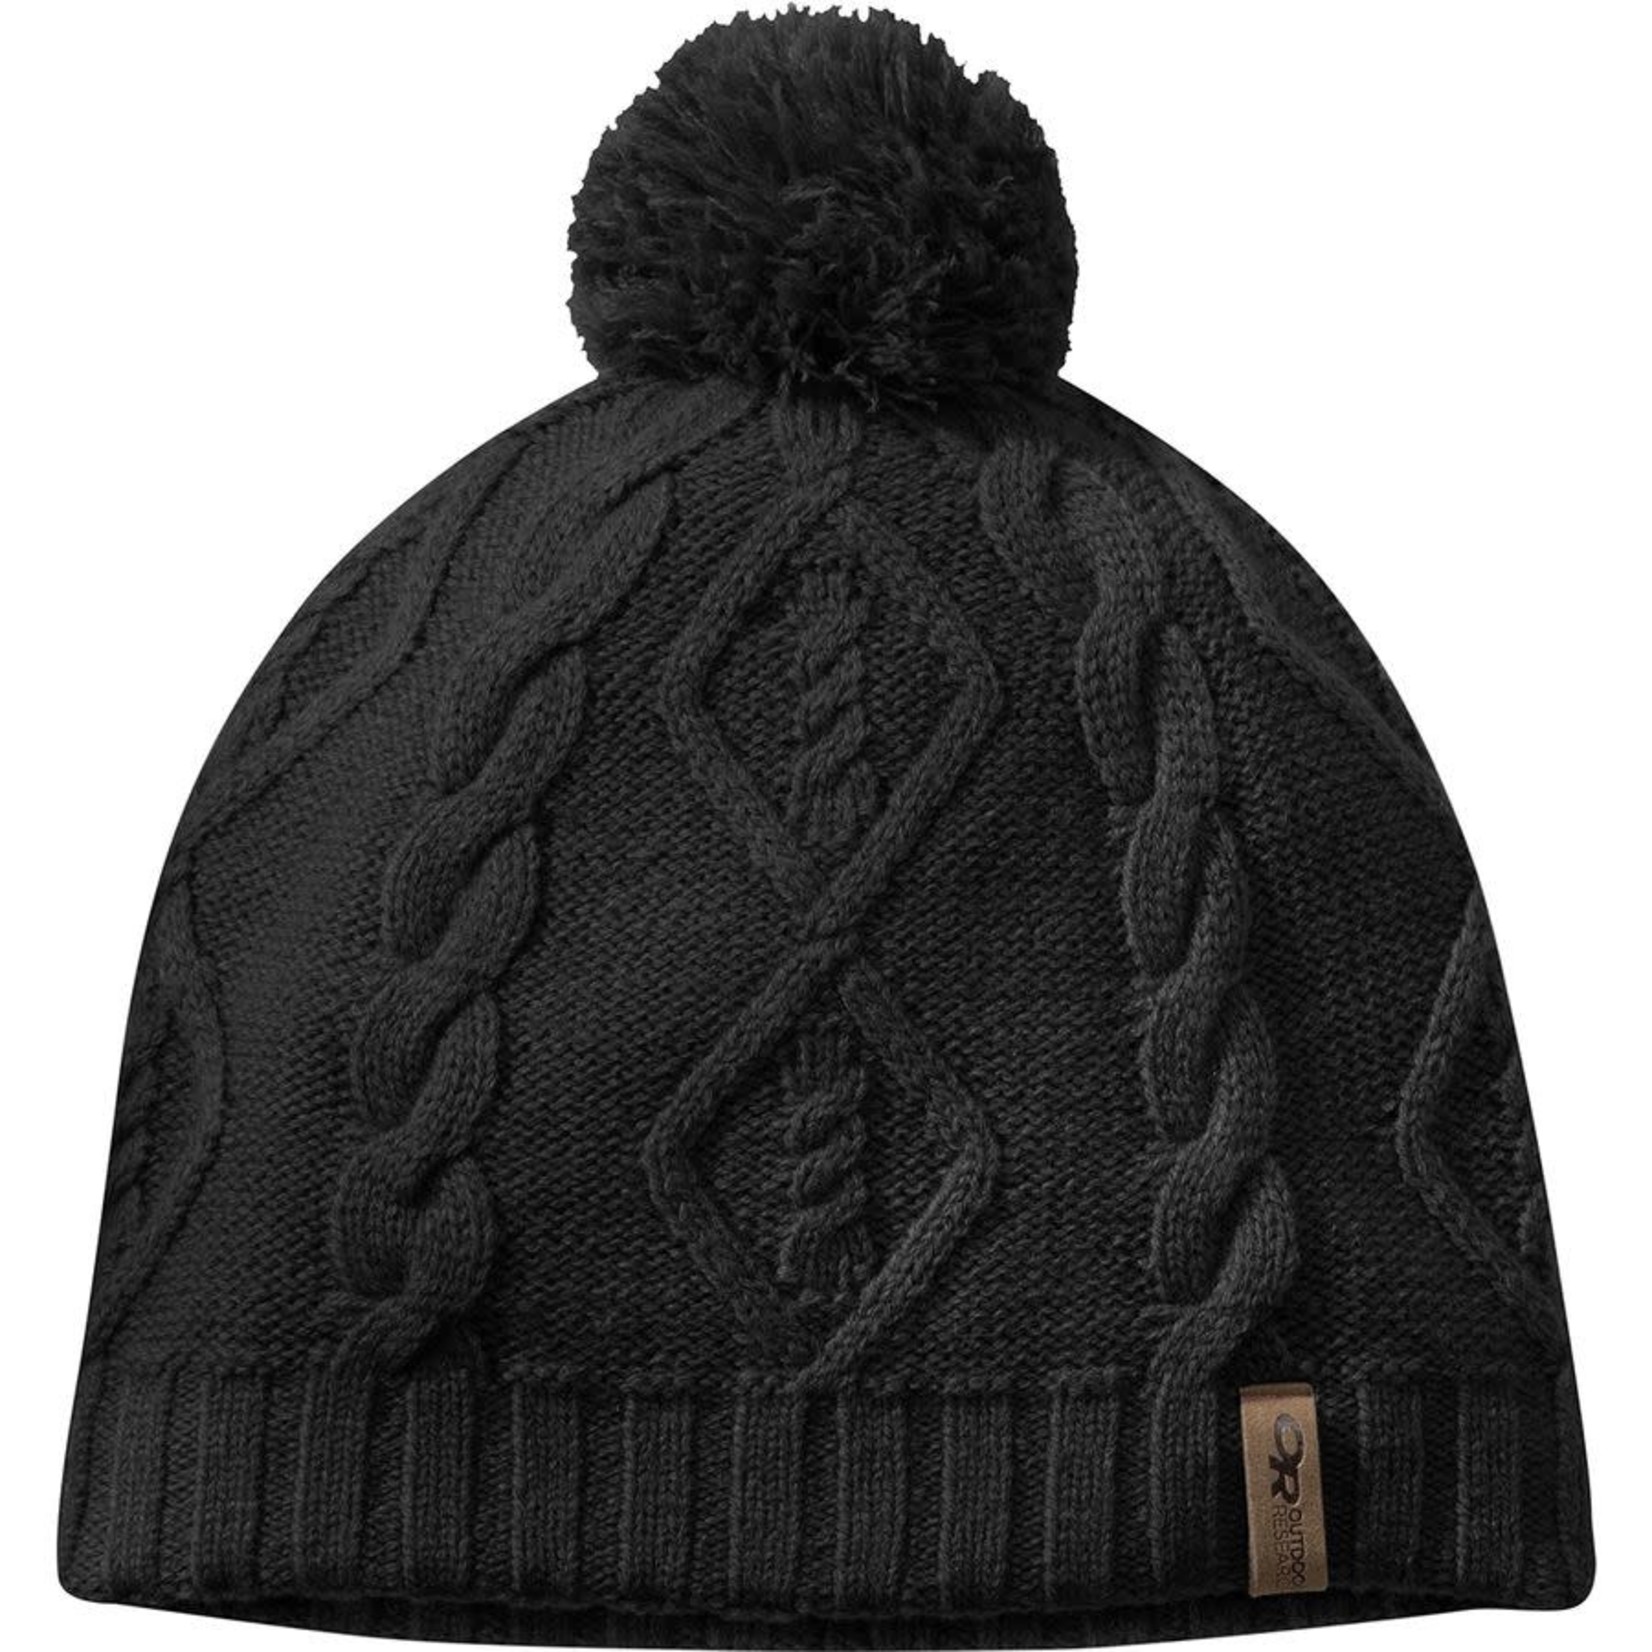 Outdoor Research Outdoor Research Wmn's Lodgeside Beanie Black